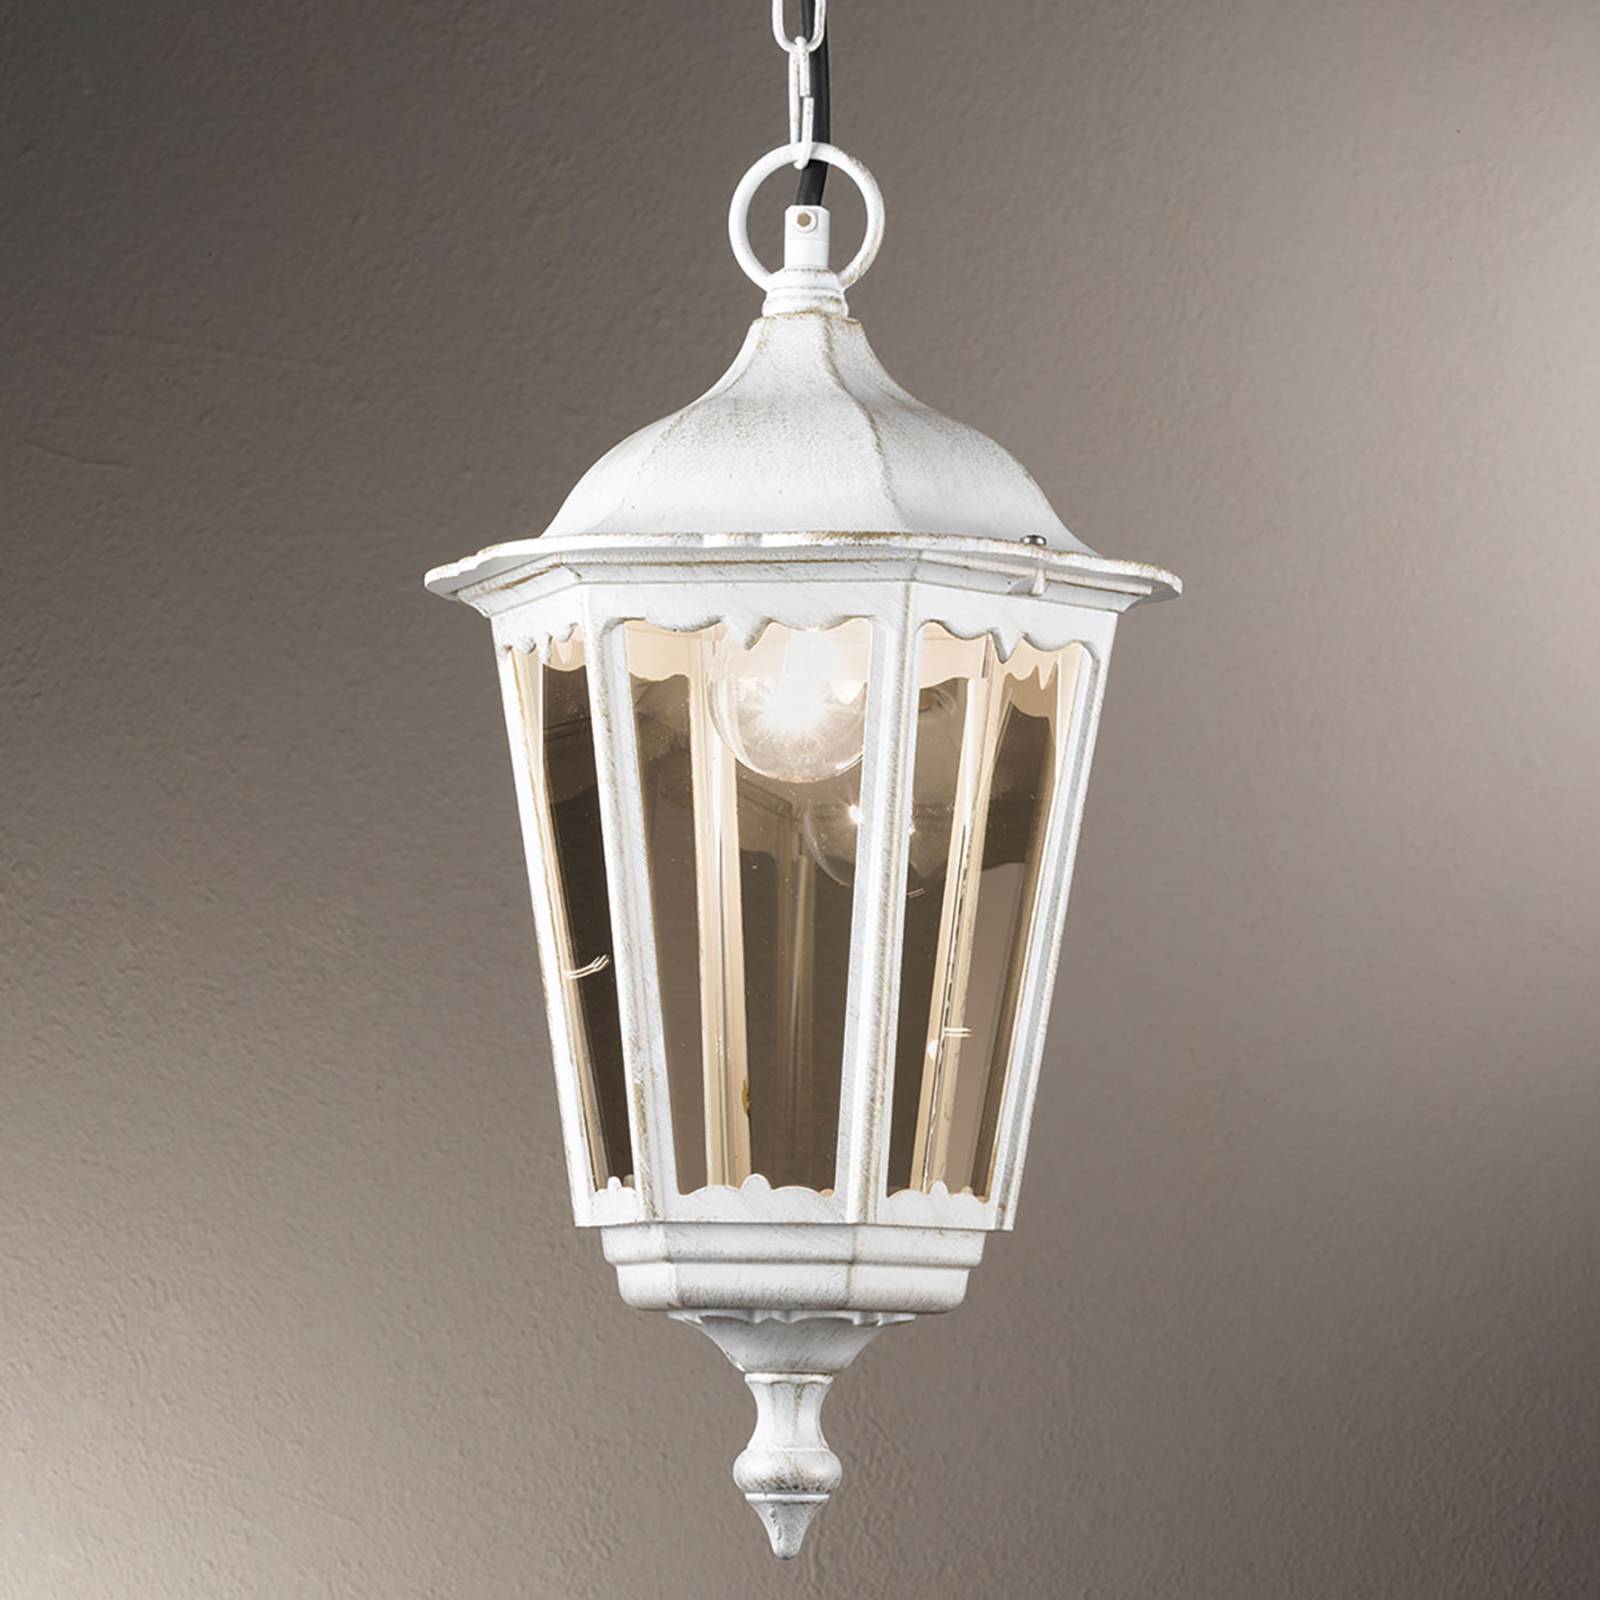 Puchberg pendant light for outside, white and gold